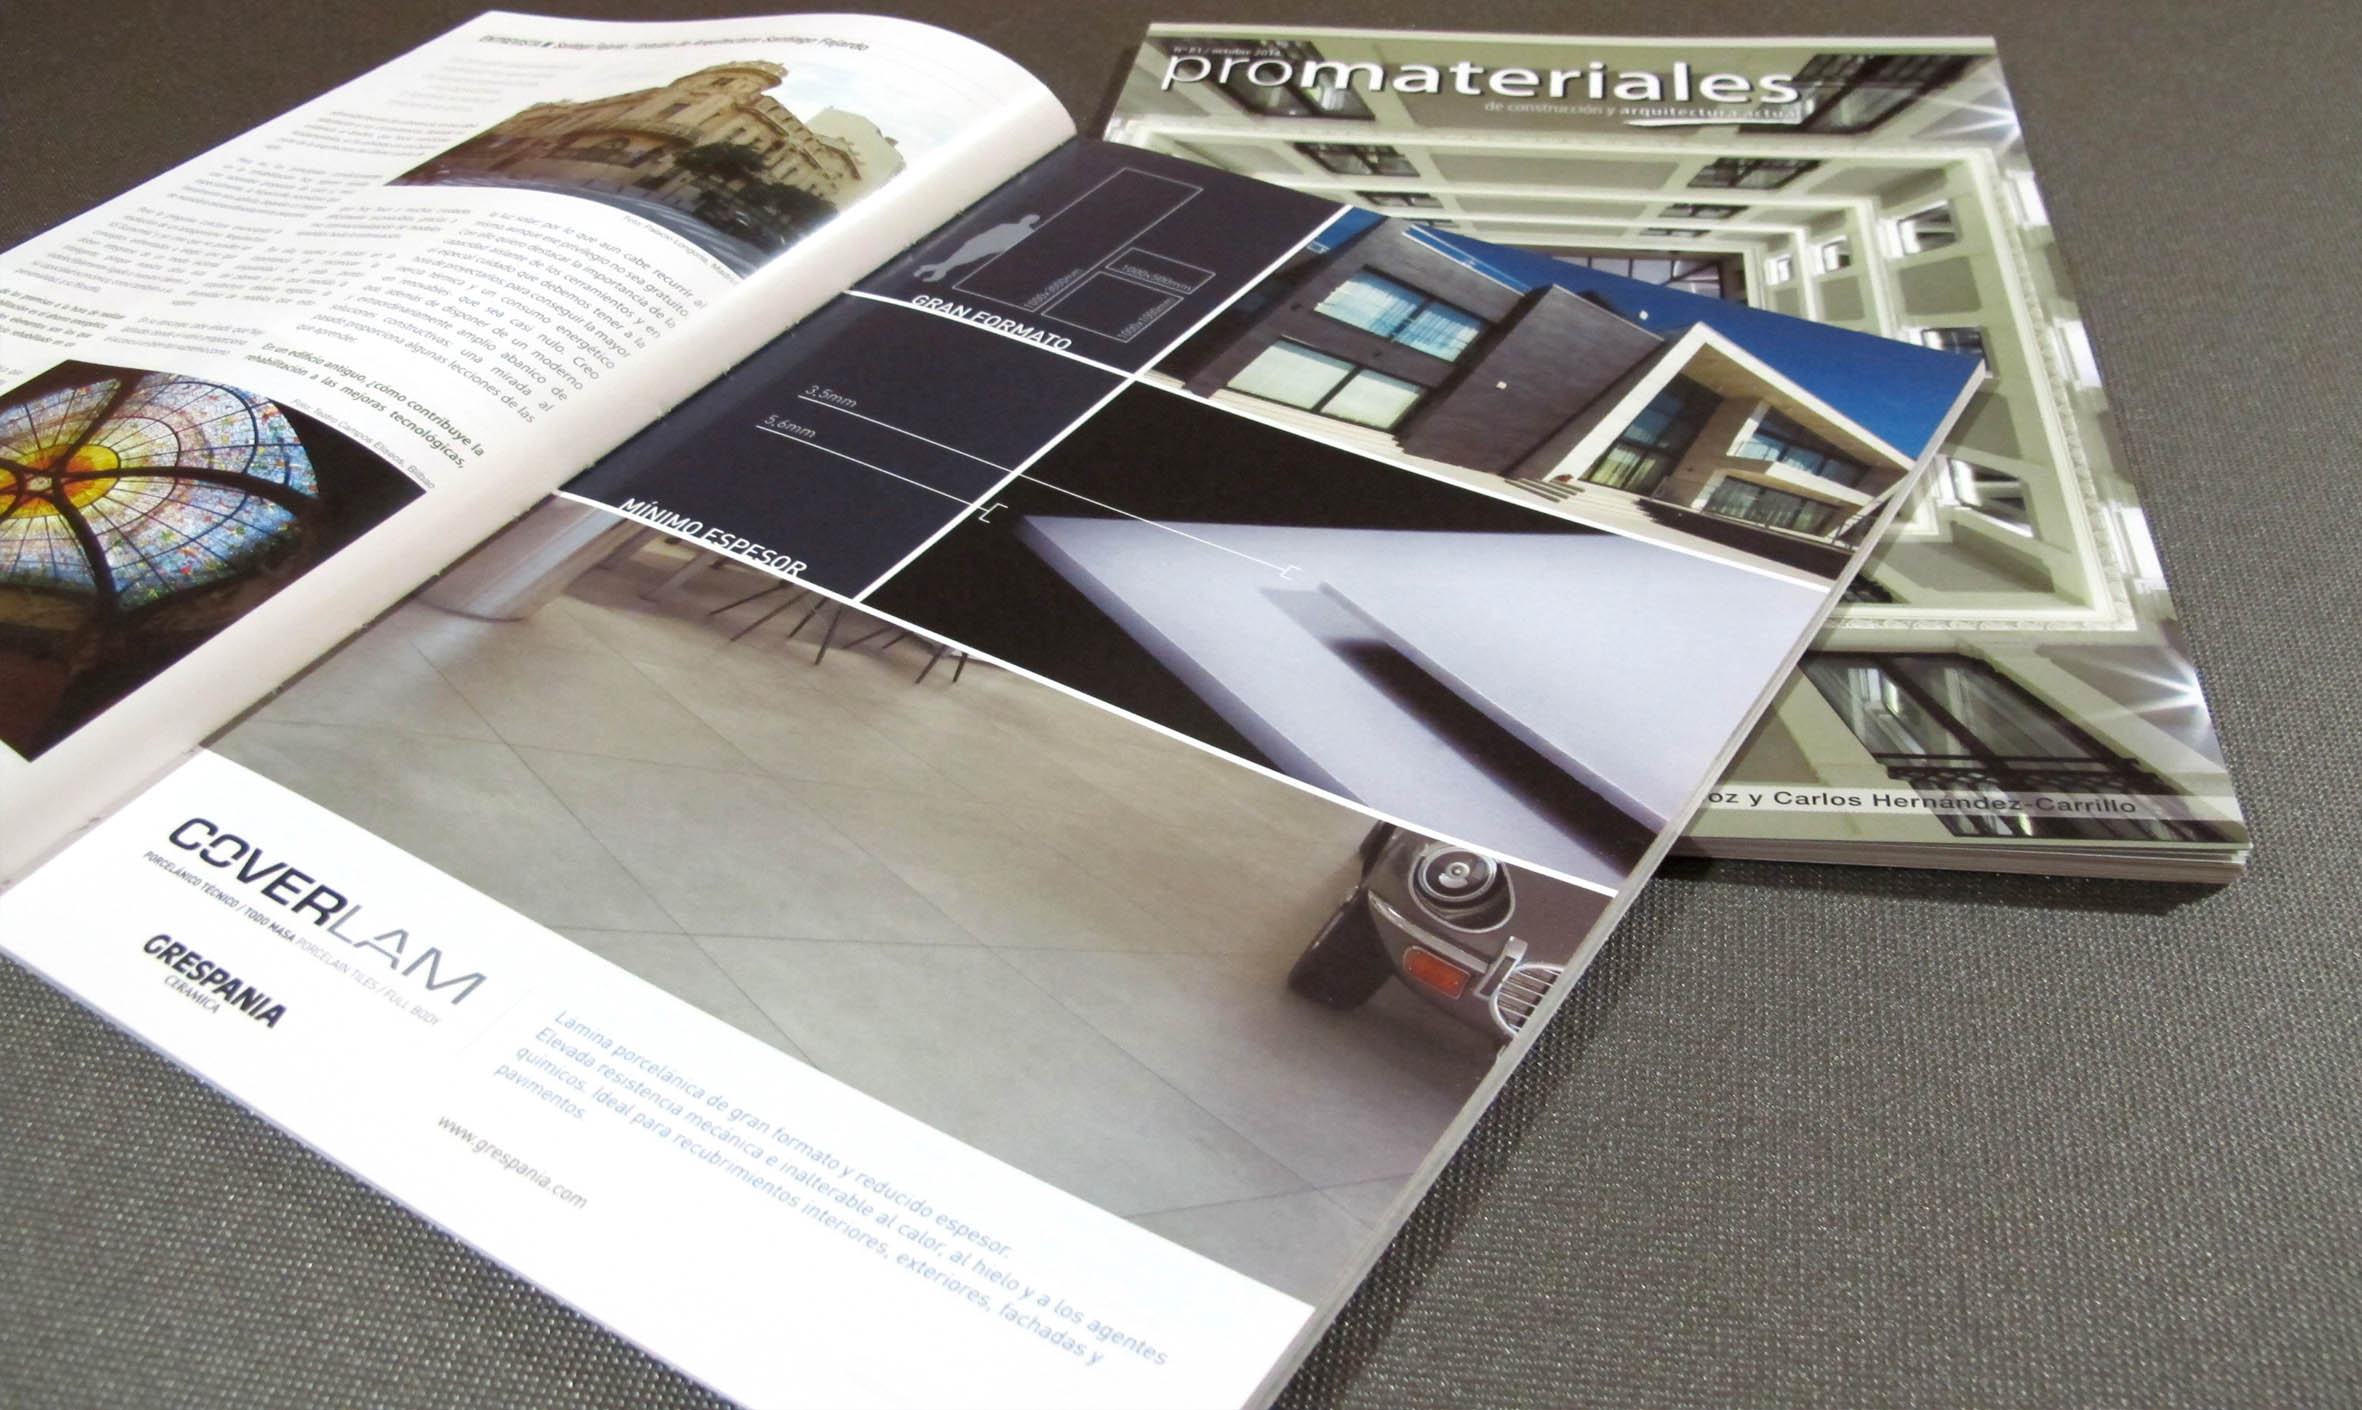 PROMATERIALES Nº 81 Oct 2014